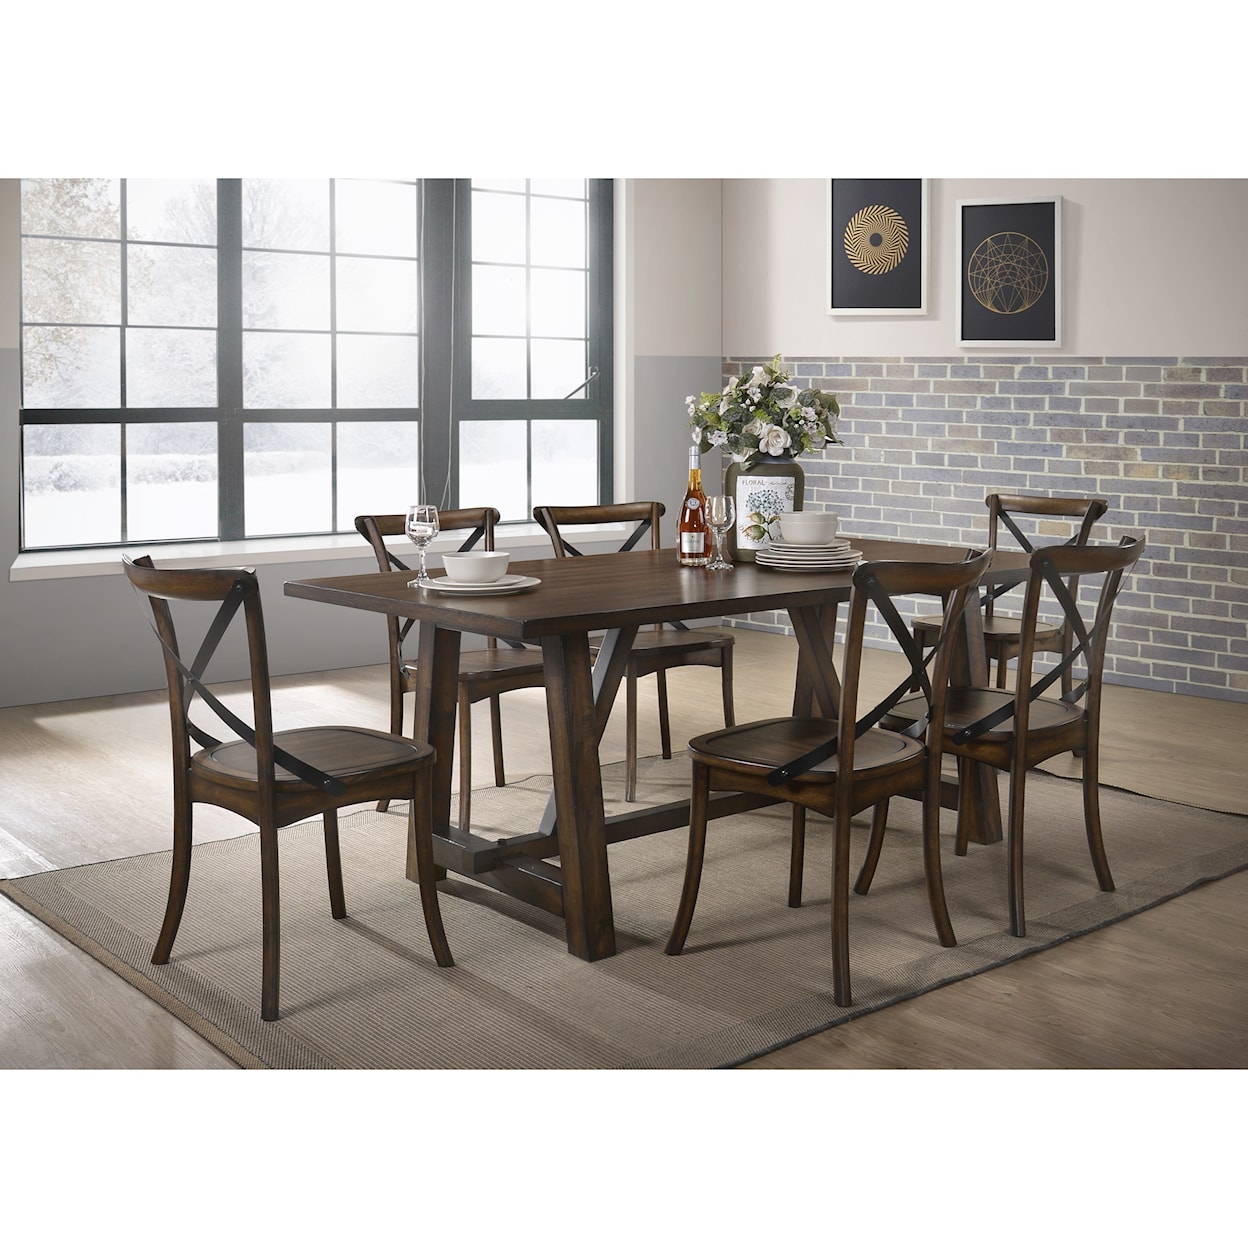 Acme Furniture Kaelyn Dining Table